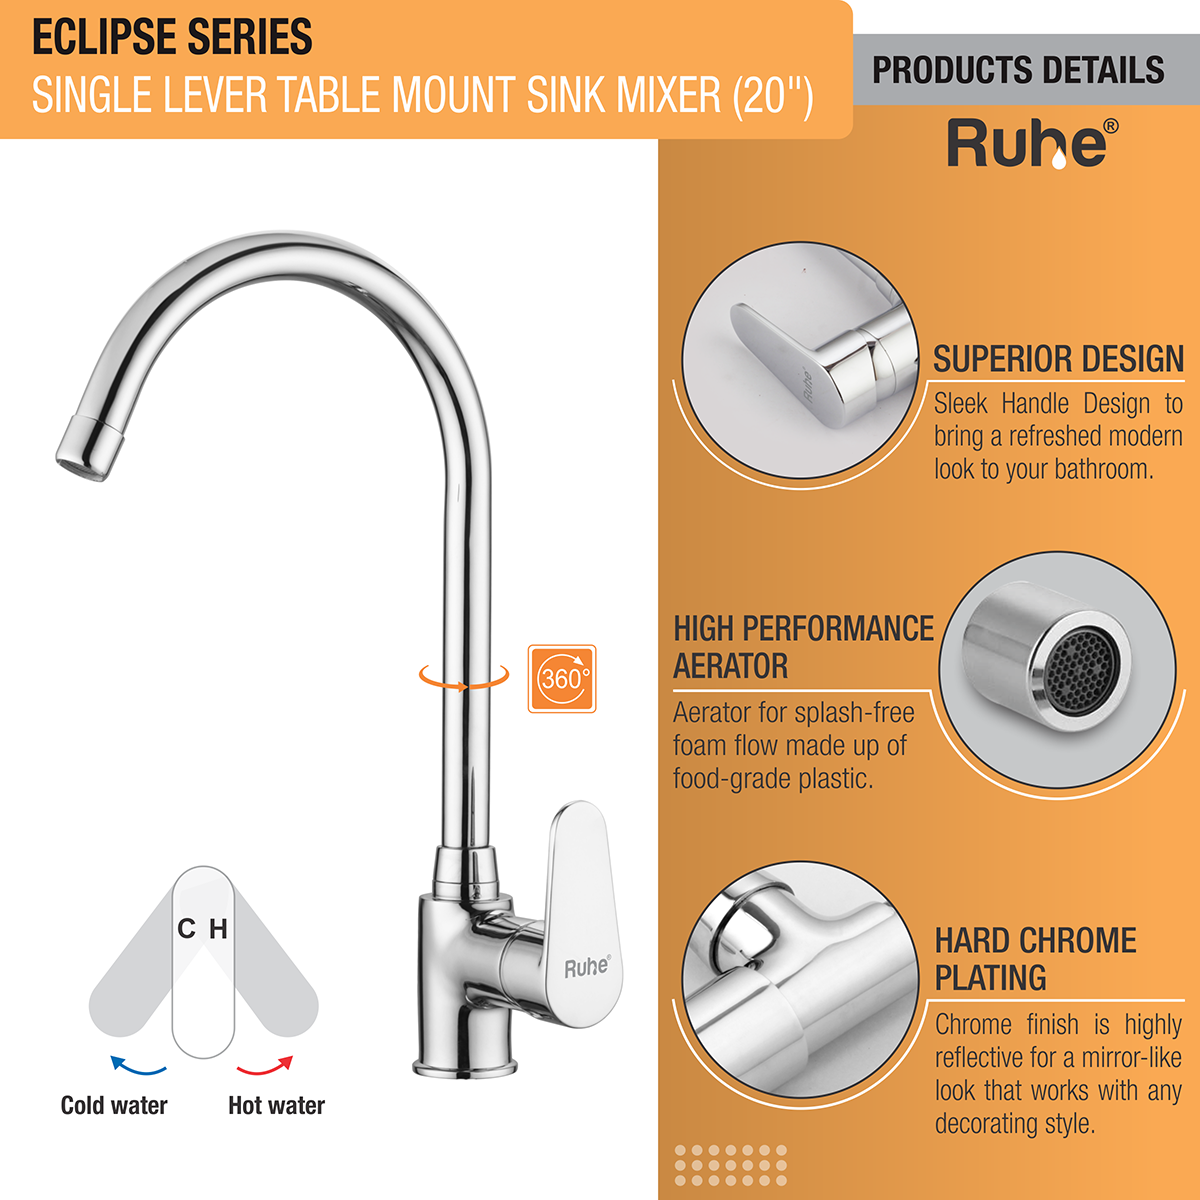 Eclipse Single Lever Table Mount Sink Mixer Brass Faucet with Large (20 inches) Round Swivel Spout features and benefits